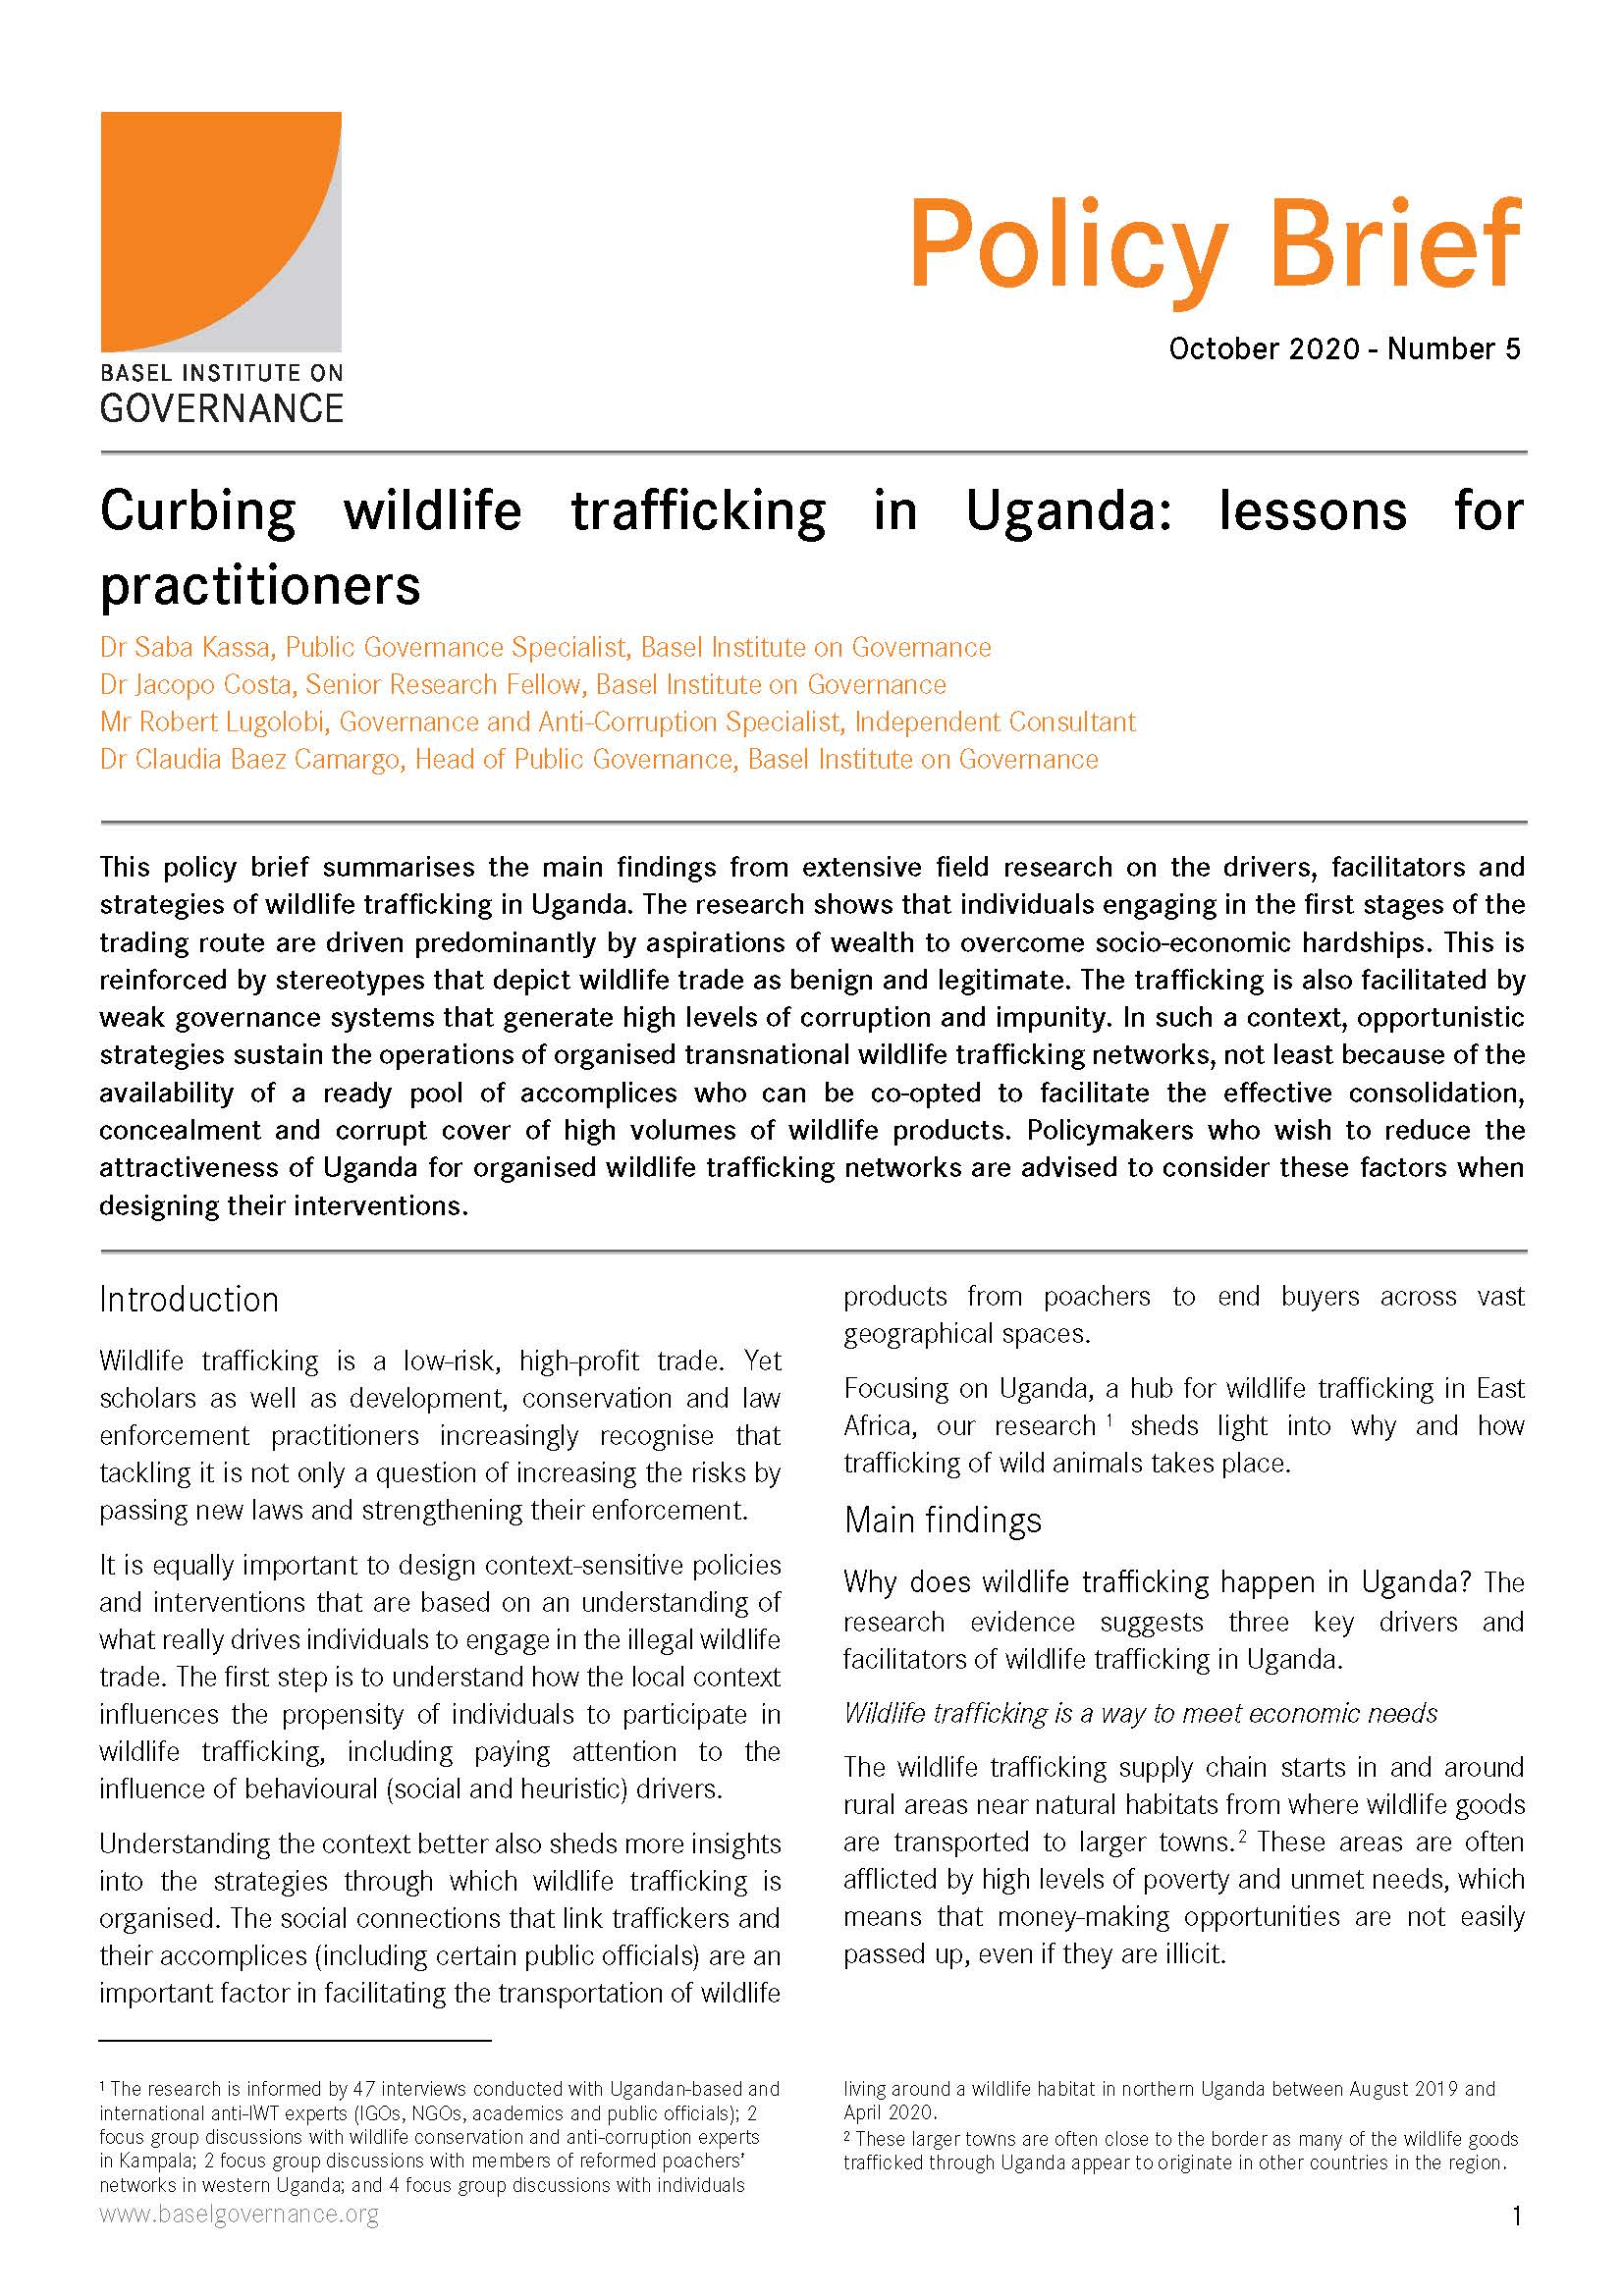 Policy brief - curbing wildlife trafficking in Uganda cover page